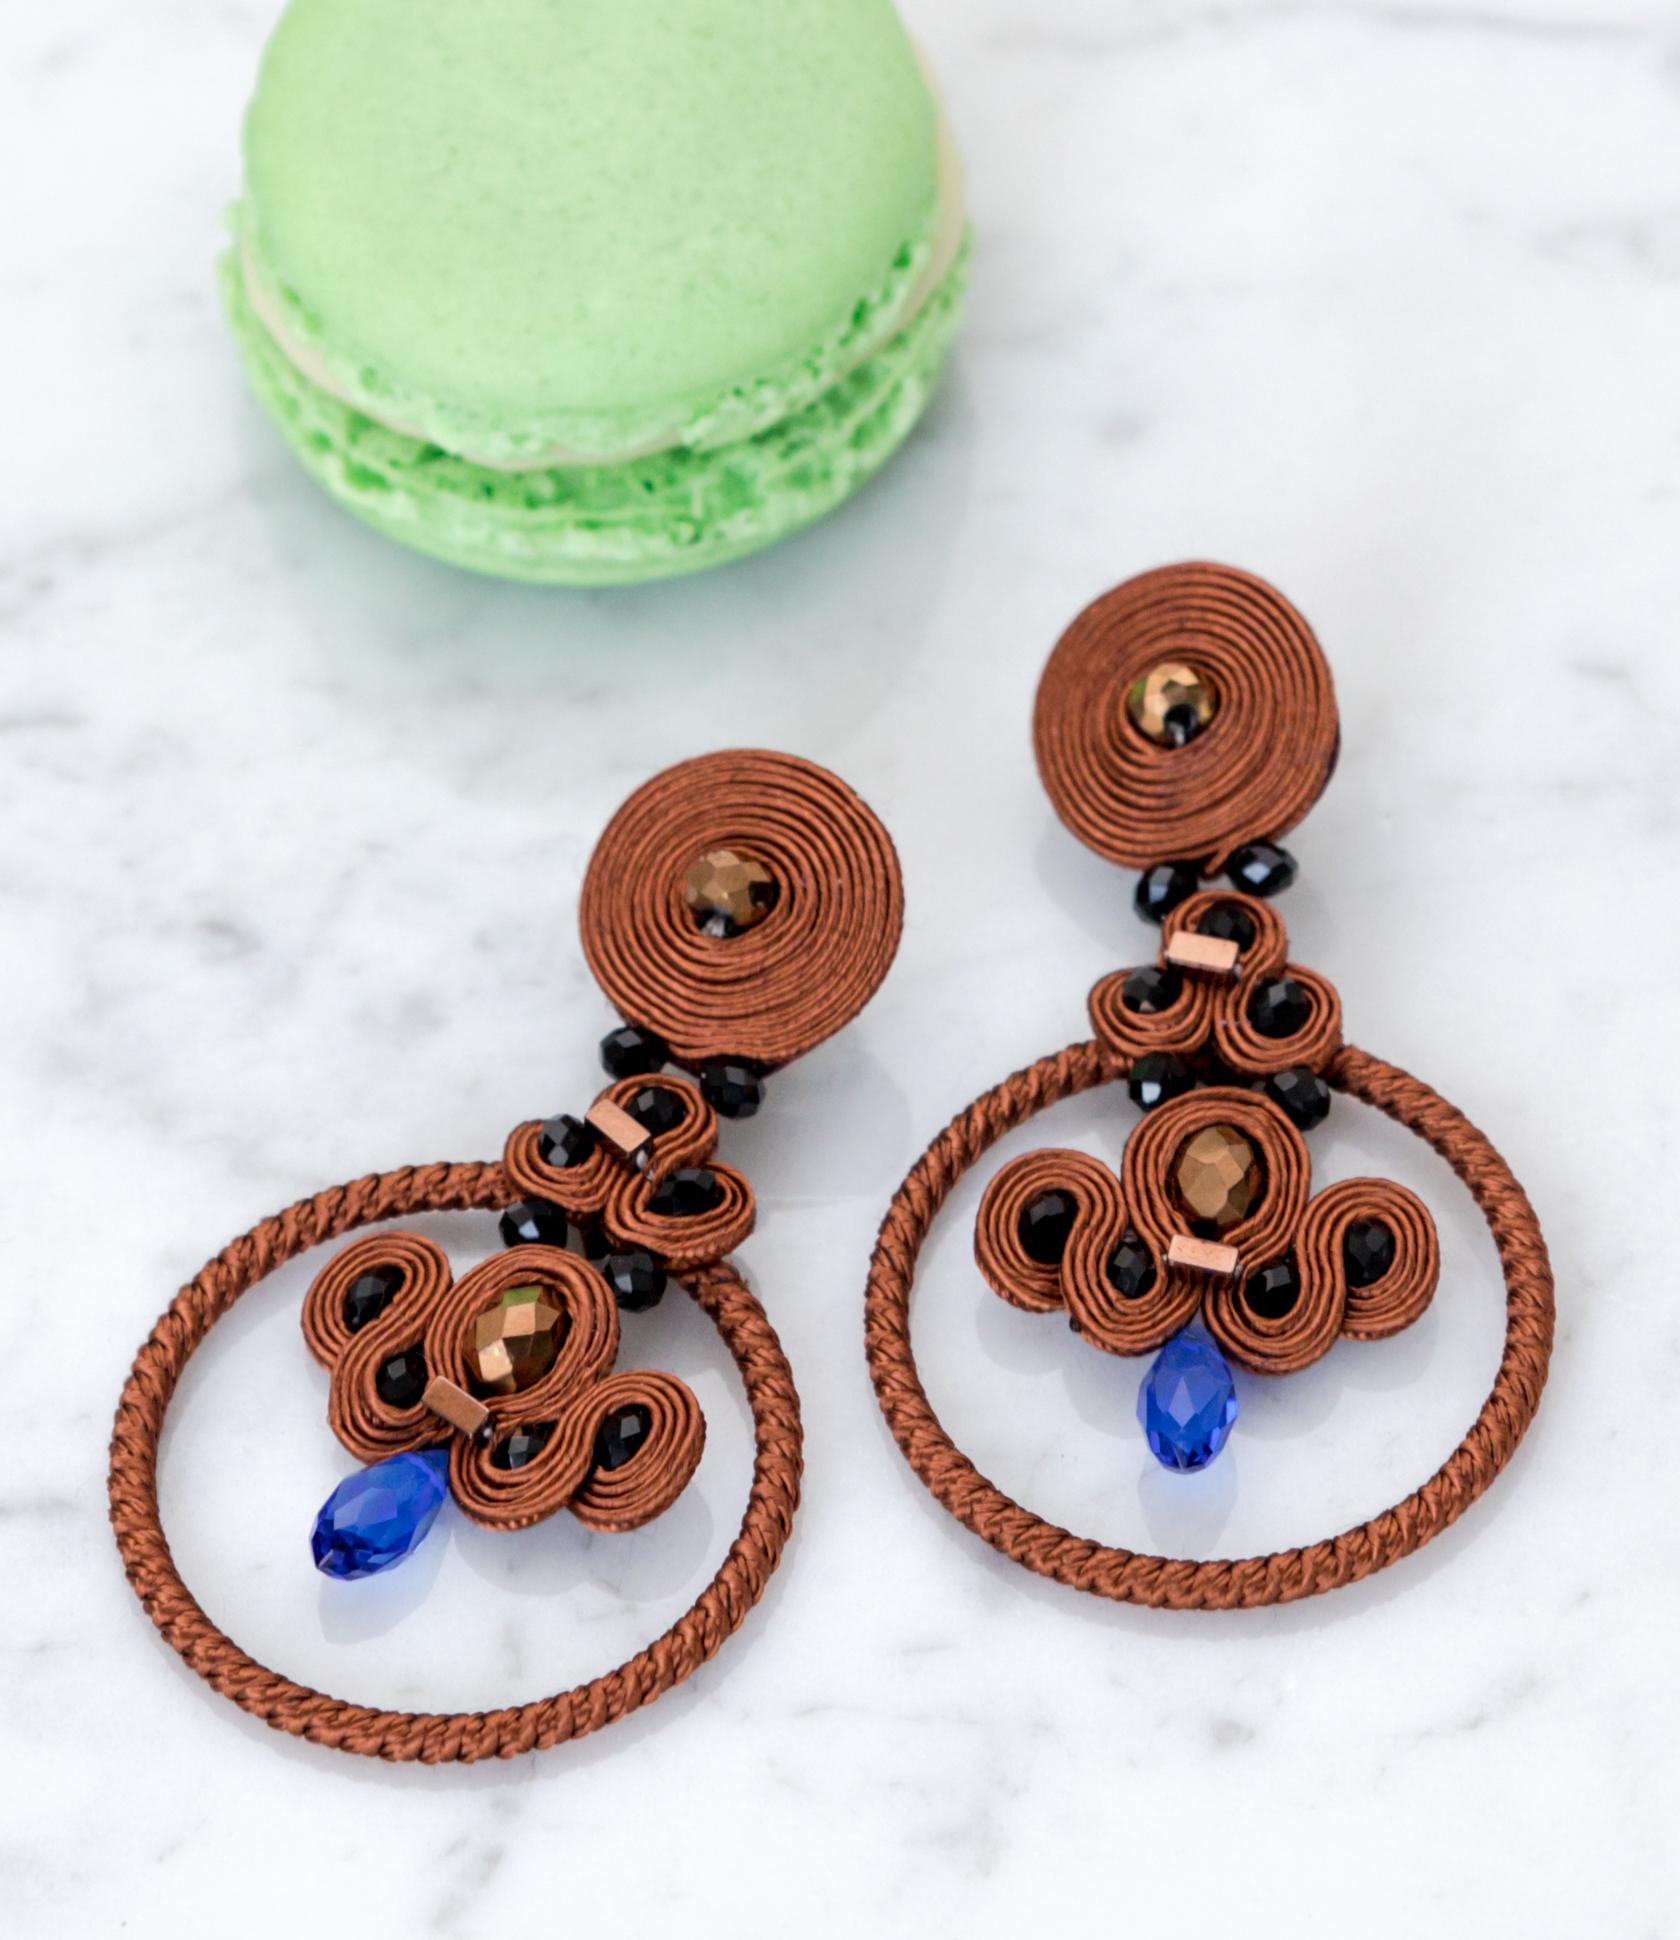 Musula La Patisserie Macarons Chocolat Earrings
La Patisserie Collection is a special homage to sweet lovers
Musula in the Fall collection 2021 wants  to pay tribute to the sweet and delicate Pastry world. Pastries have been always a must at our